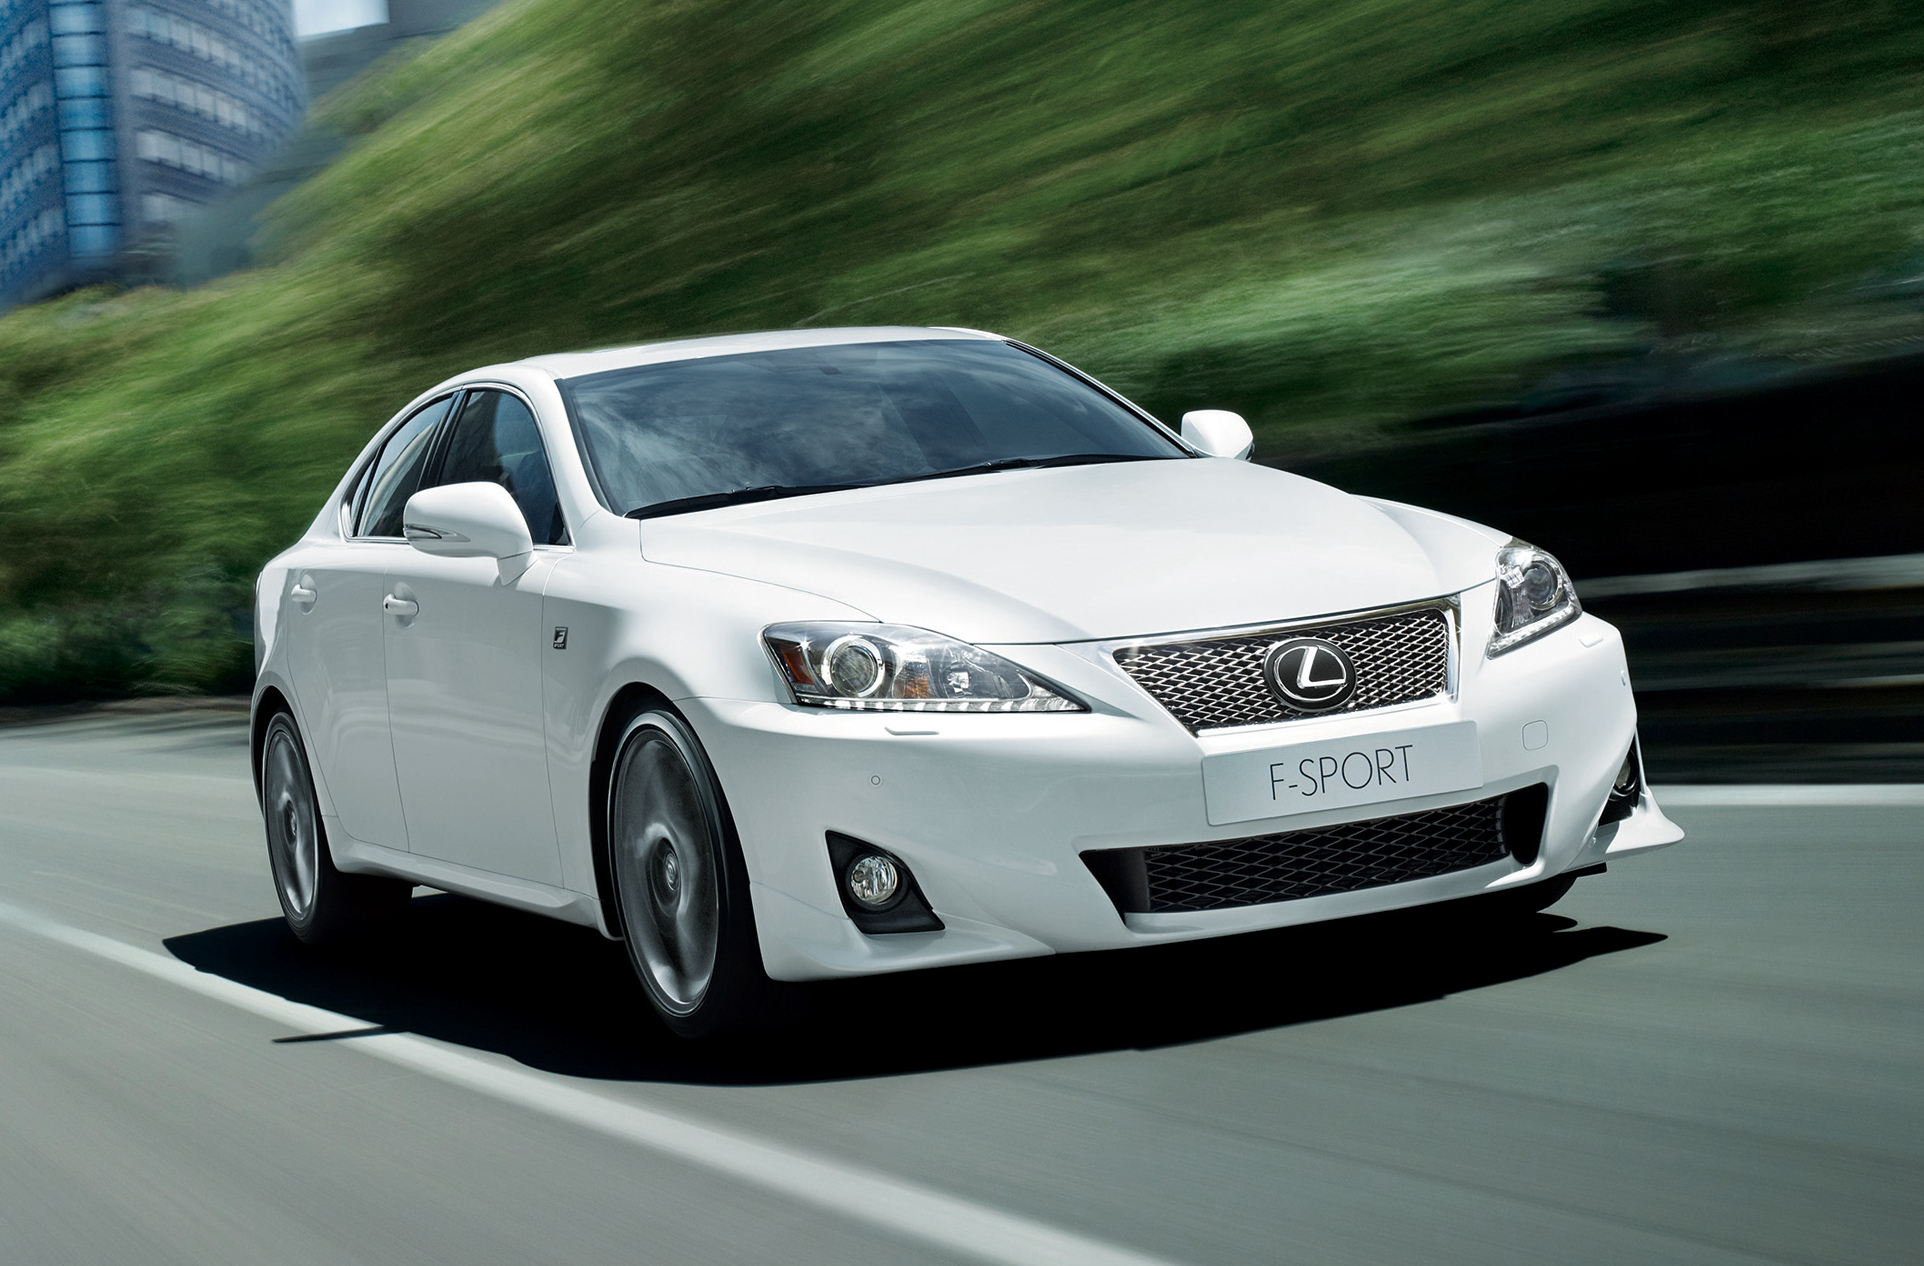 Used Car Review: Lexus IS250 (XE20) - Automacha